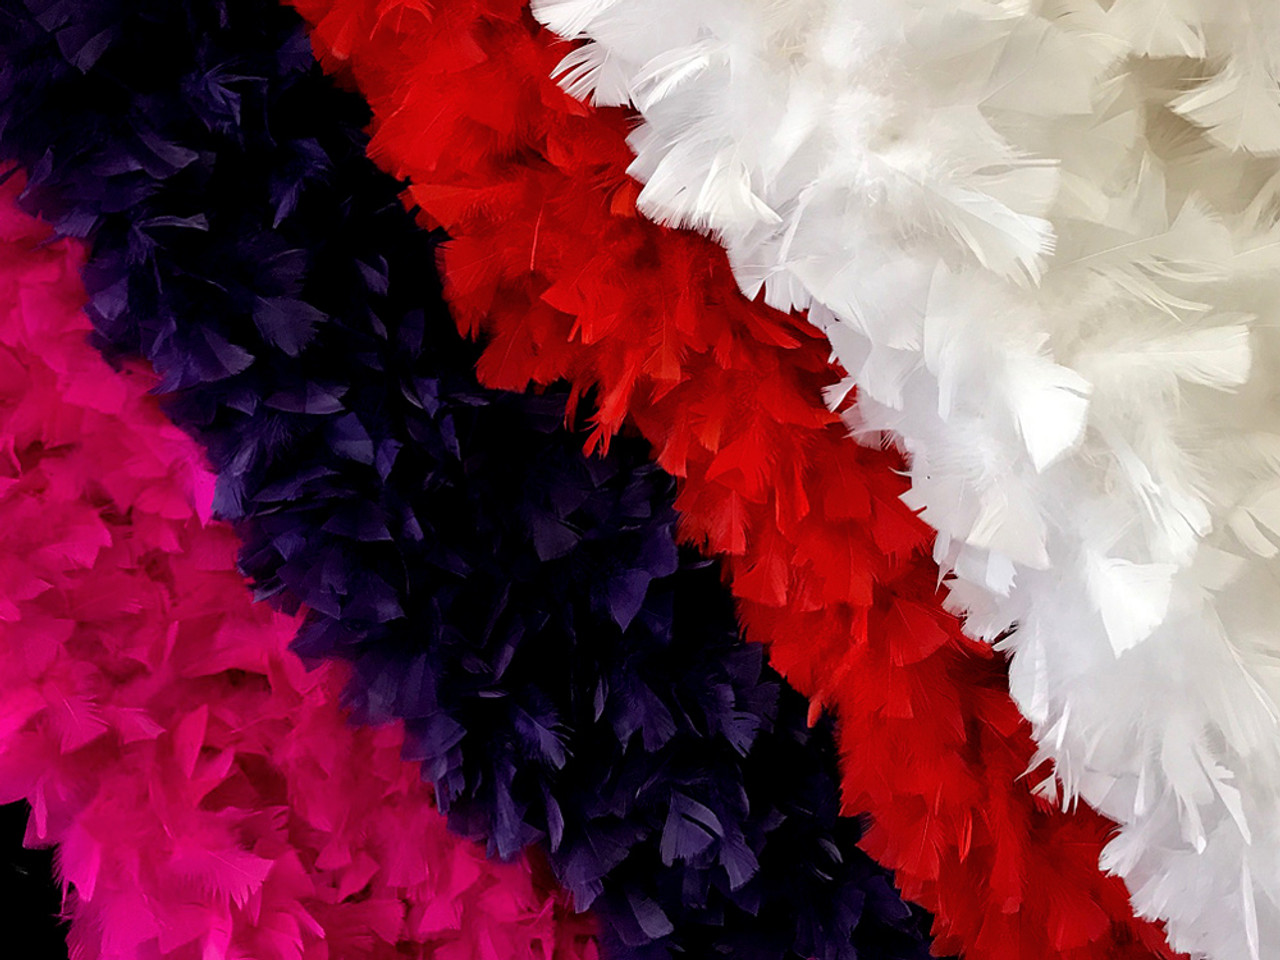 Hot sales! 2M long Natural Turkey feathers Feather boa  weddings/parties/home improvement/scarves/Decorative diy